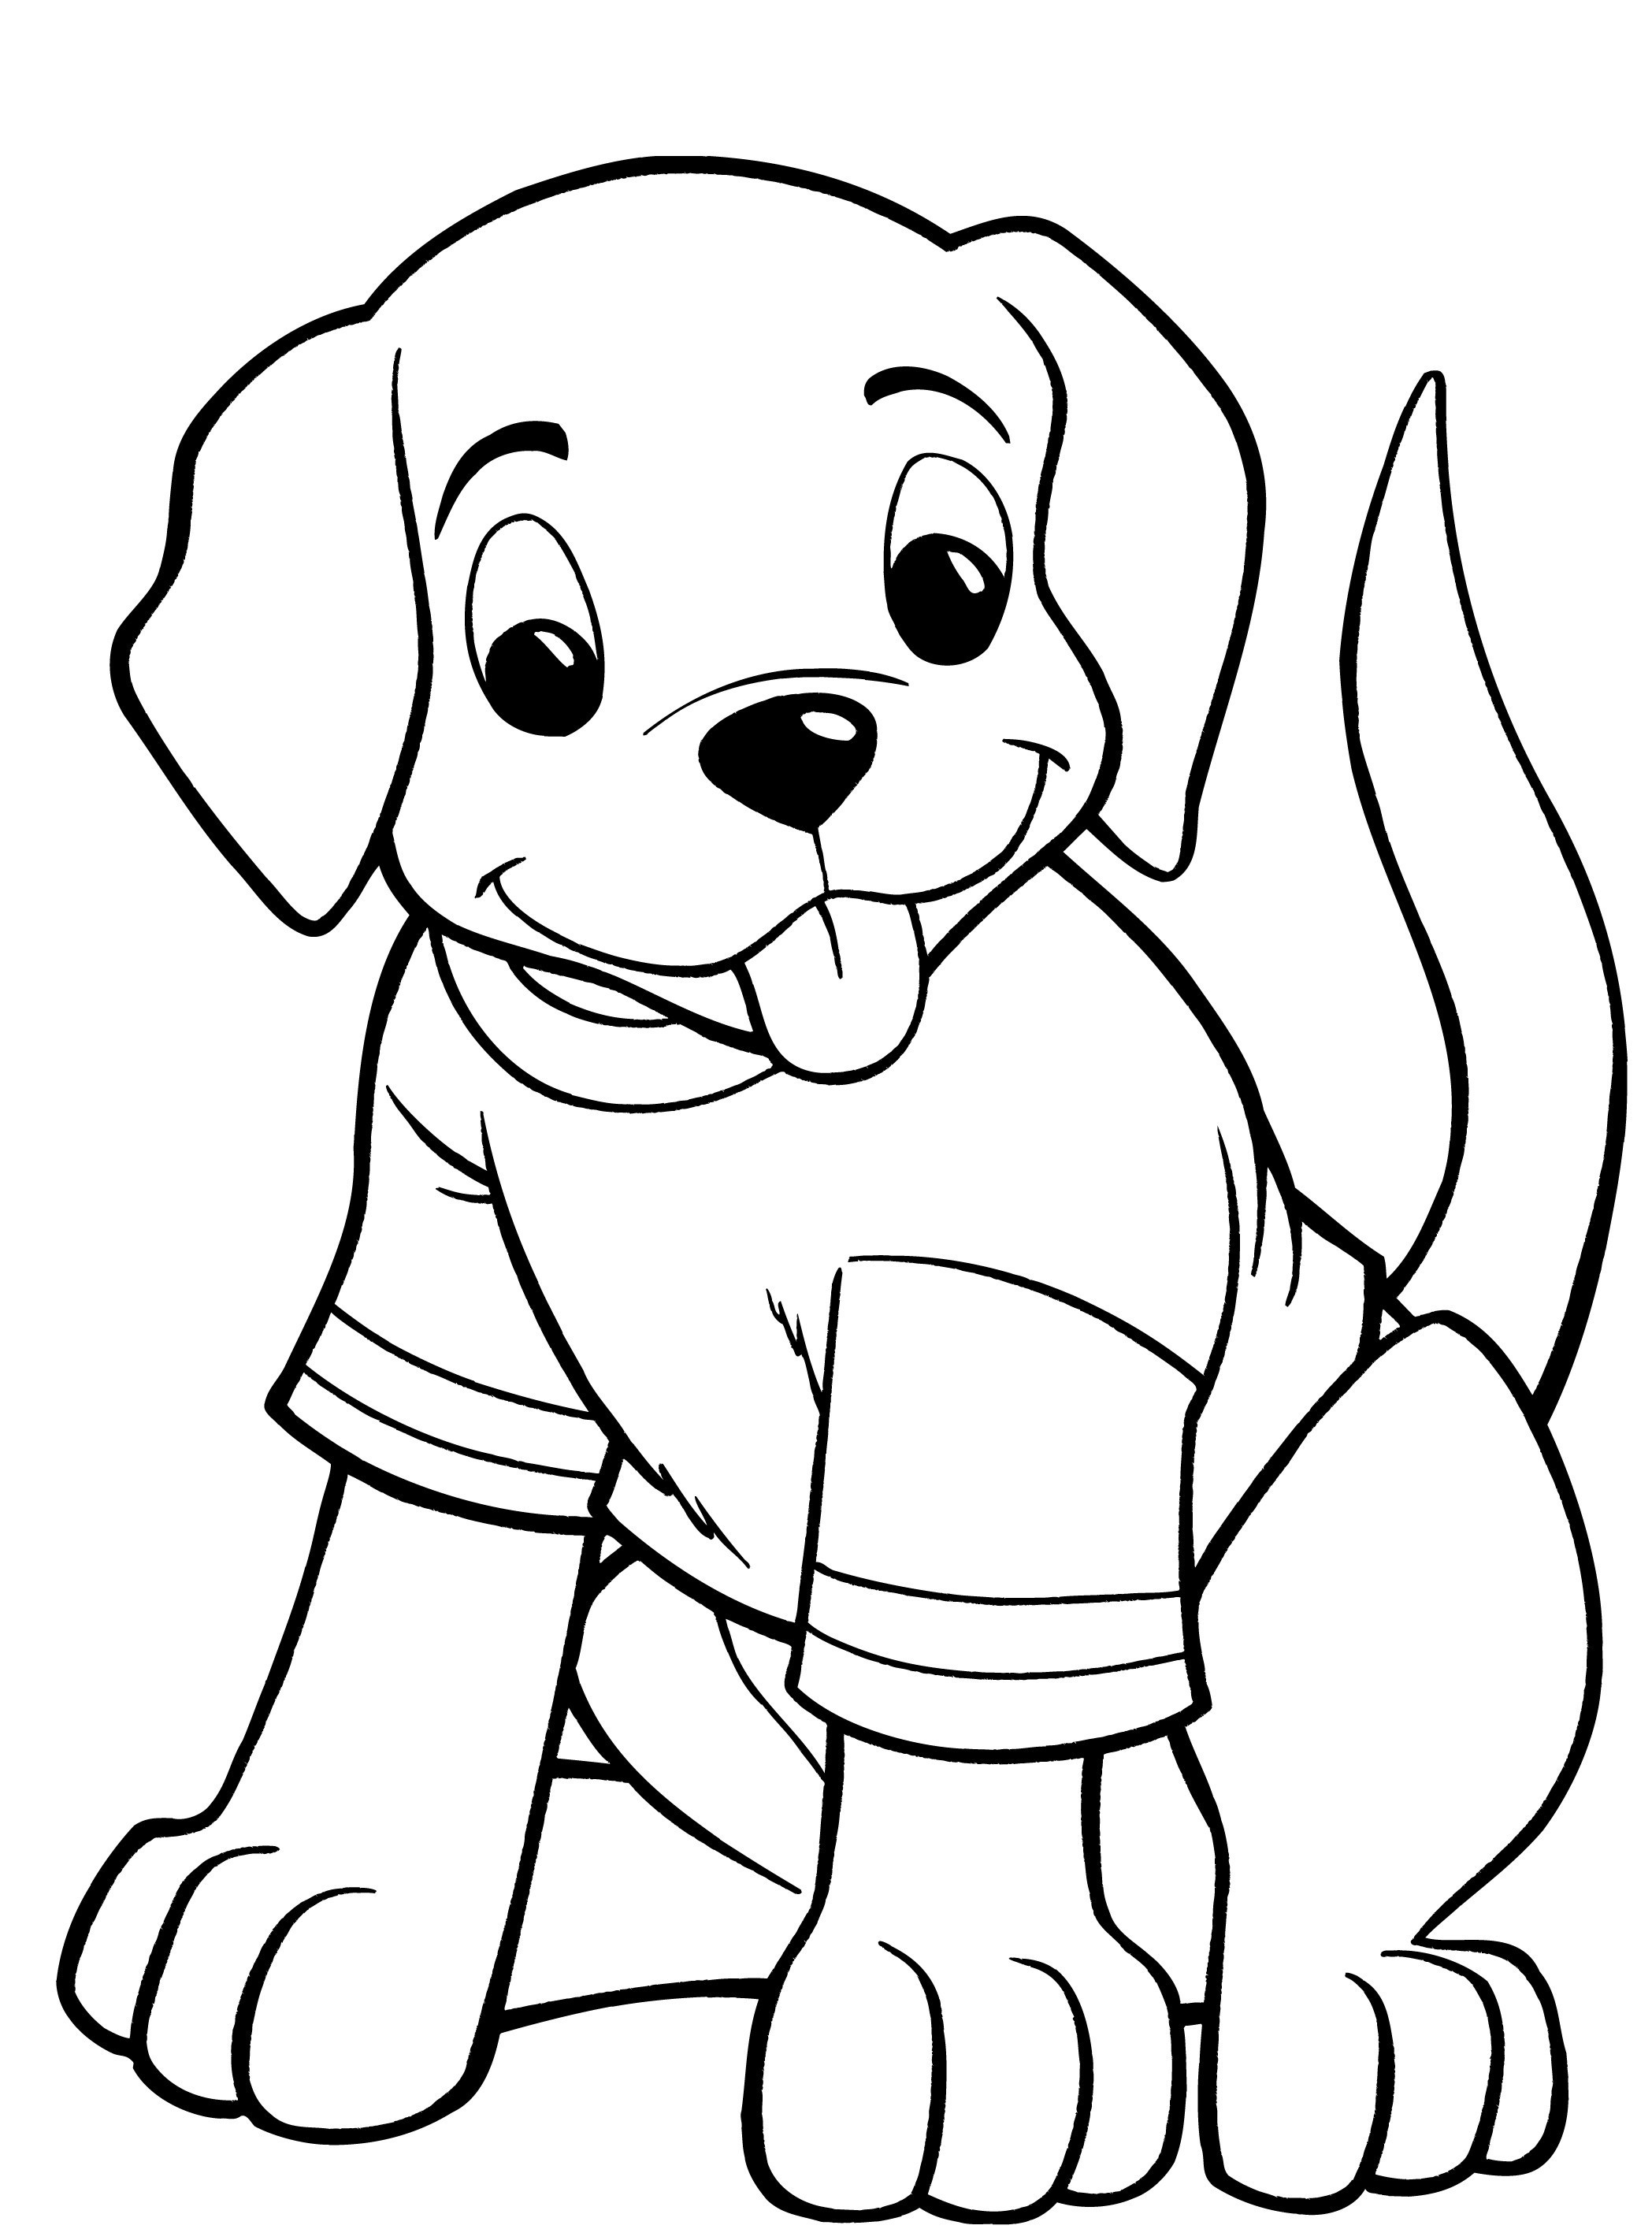 Coloring Sheets For Kids Of Dogs
 Dog Coloring Pages For Kids Preschool and Kindergarten